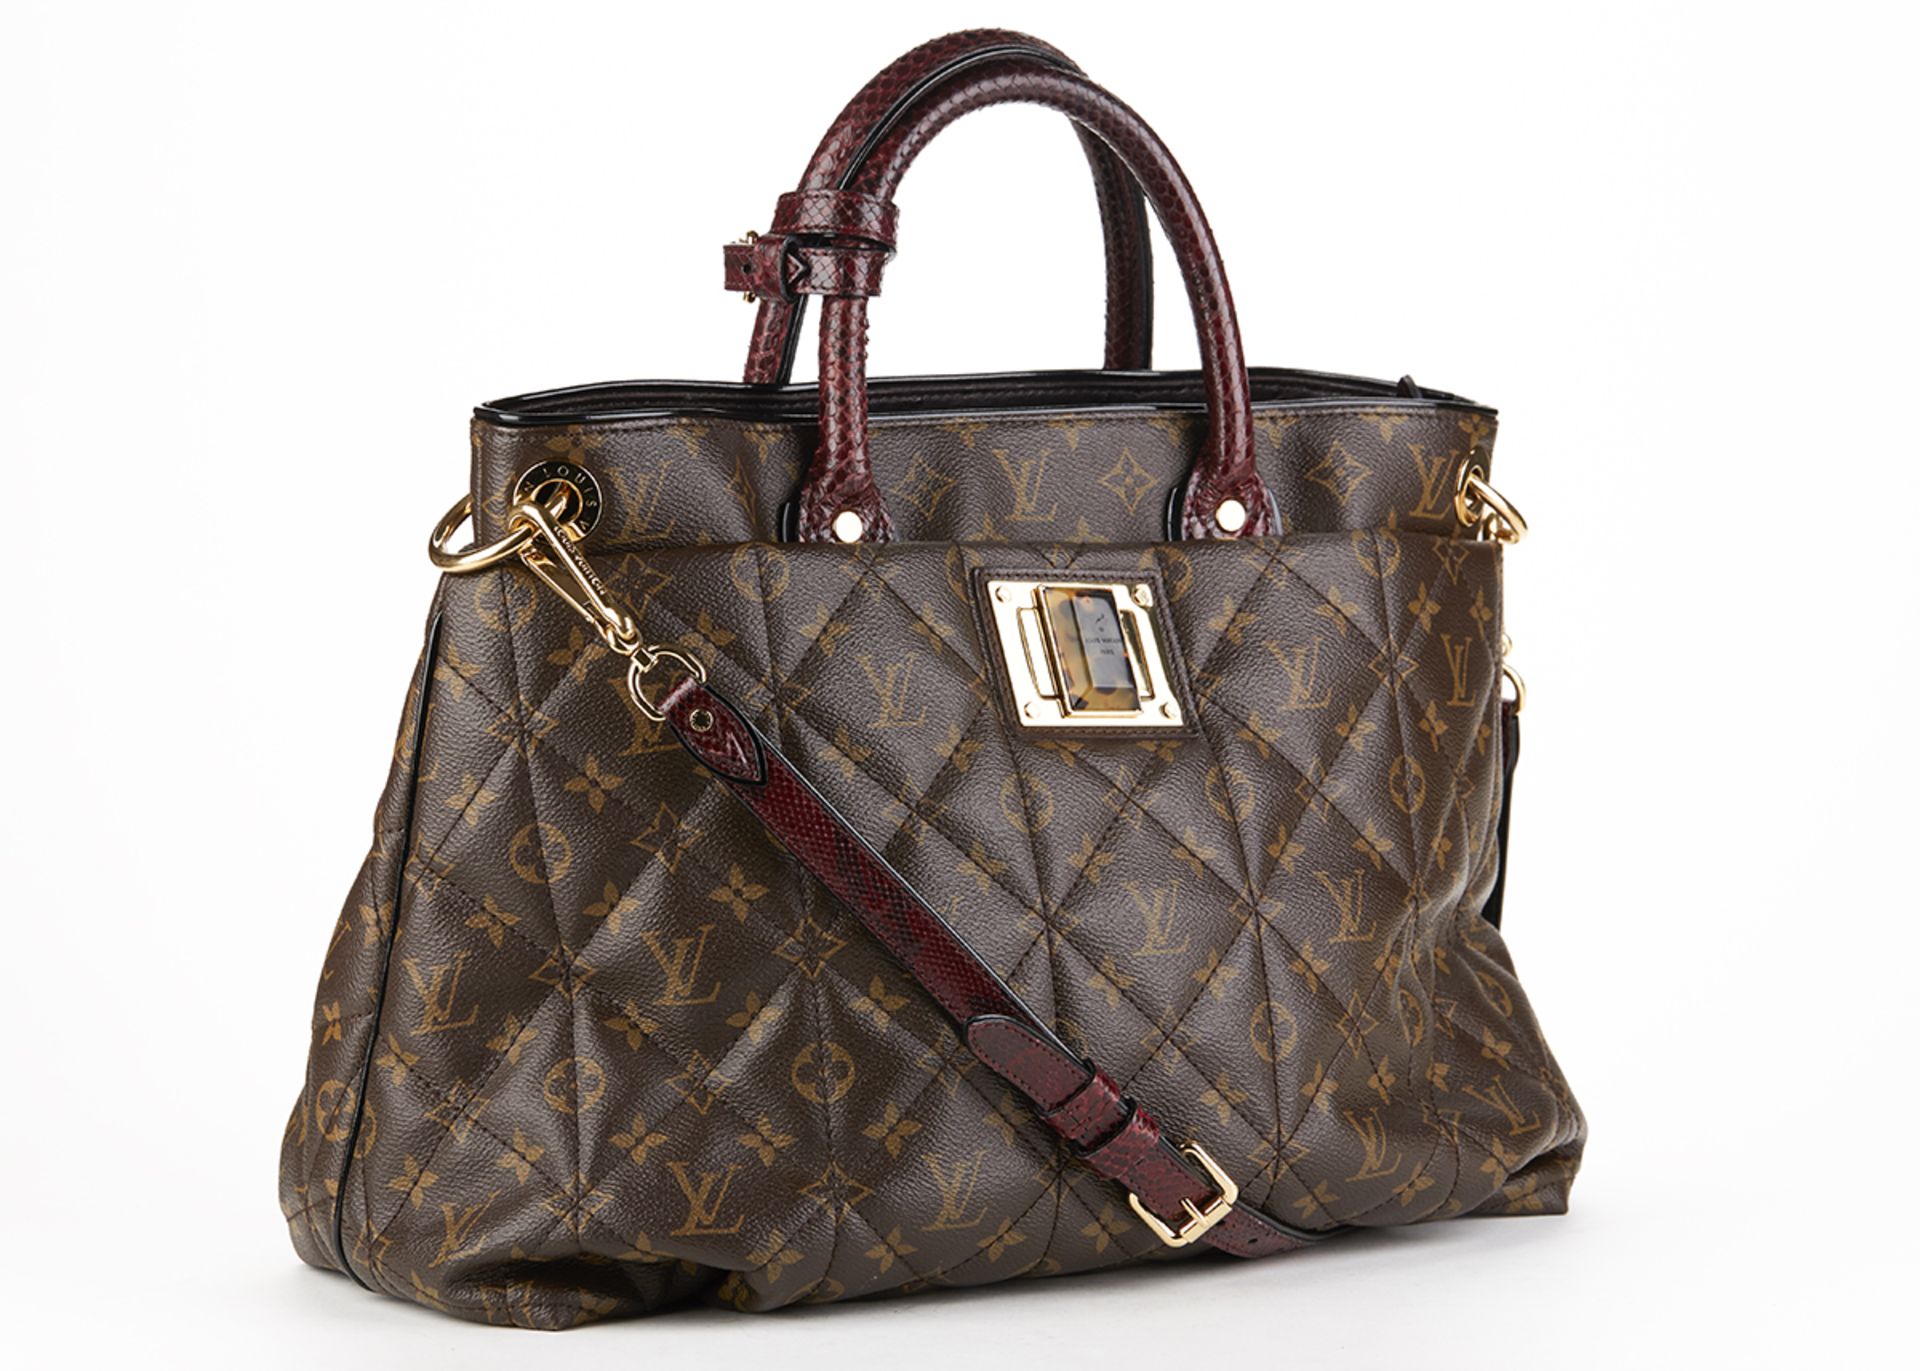 LOUIS VUITTON Tote Monogram Etoile , - Brown Classic Monogram Canvas, Ostrich and Python Leather - Image 2 of 10